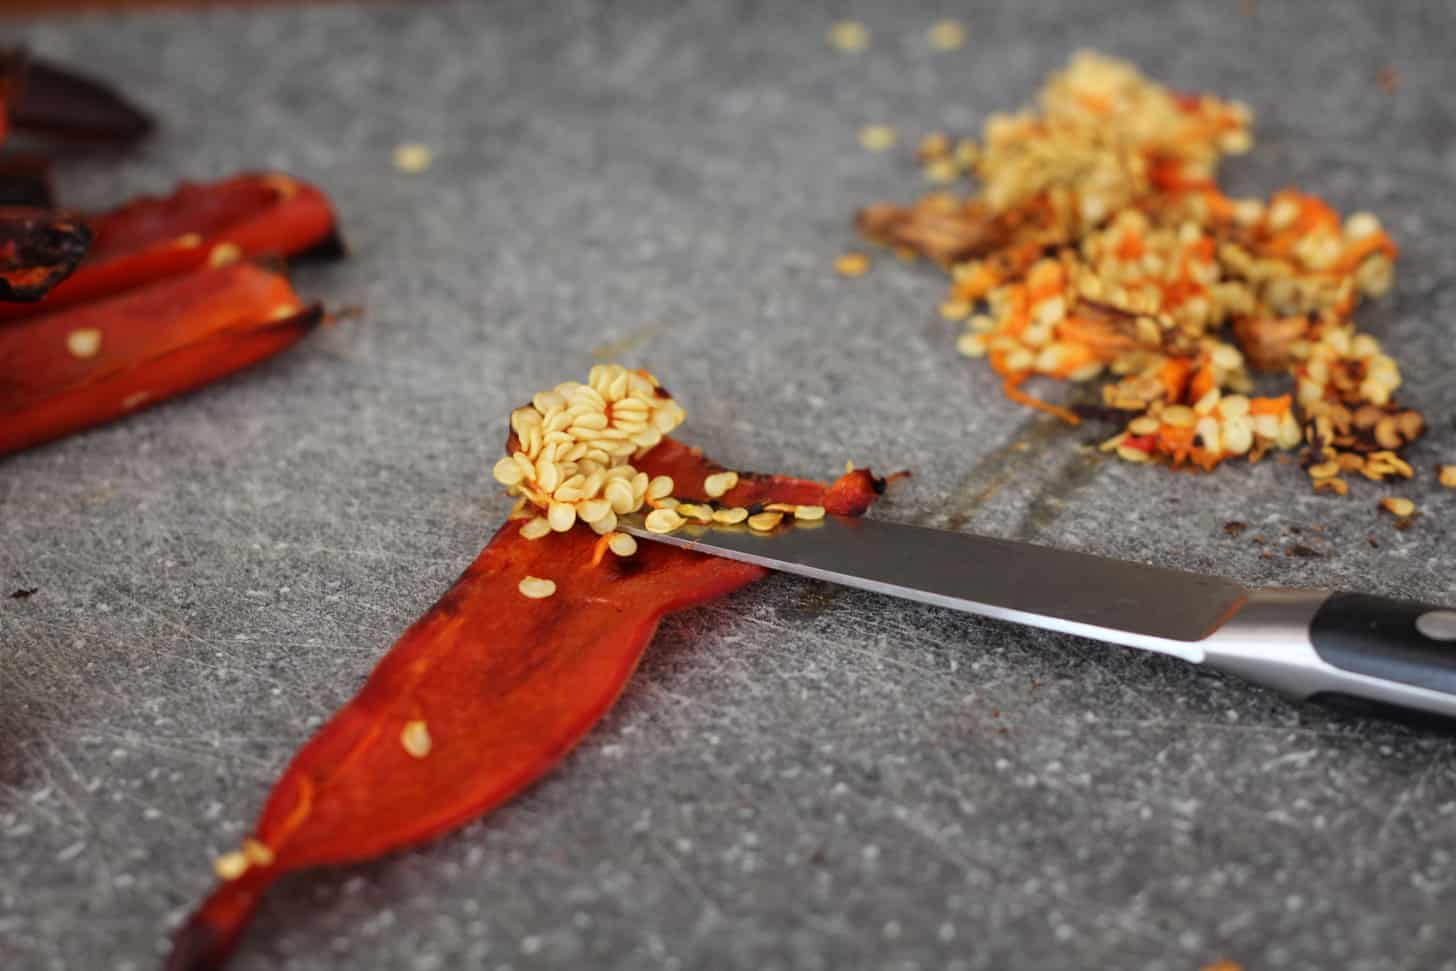 removing seeds from sliced red chili pepper